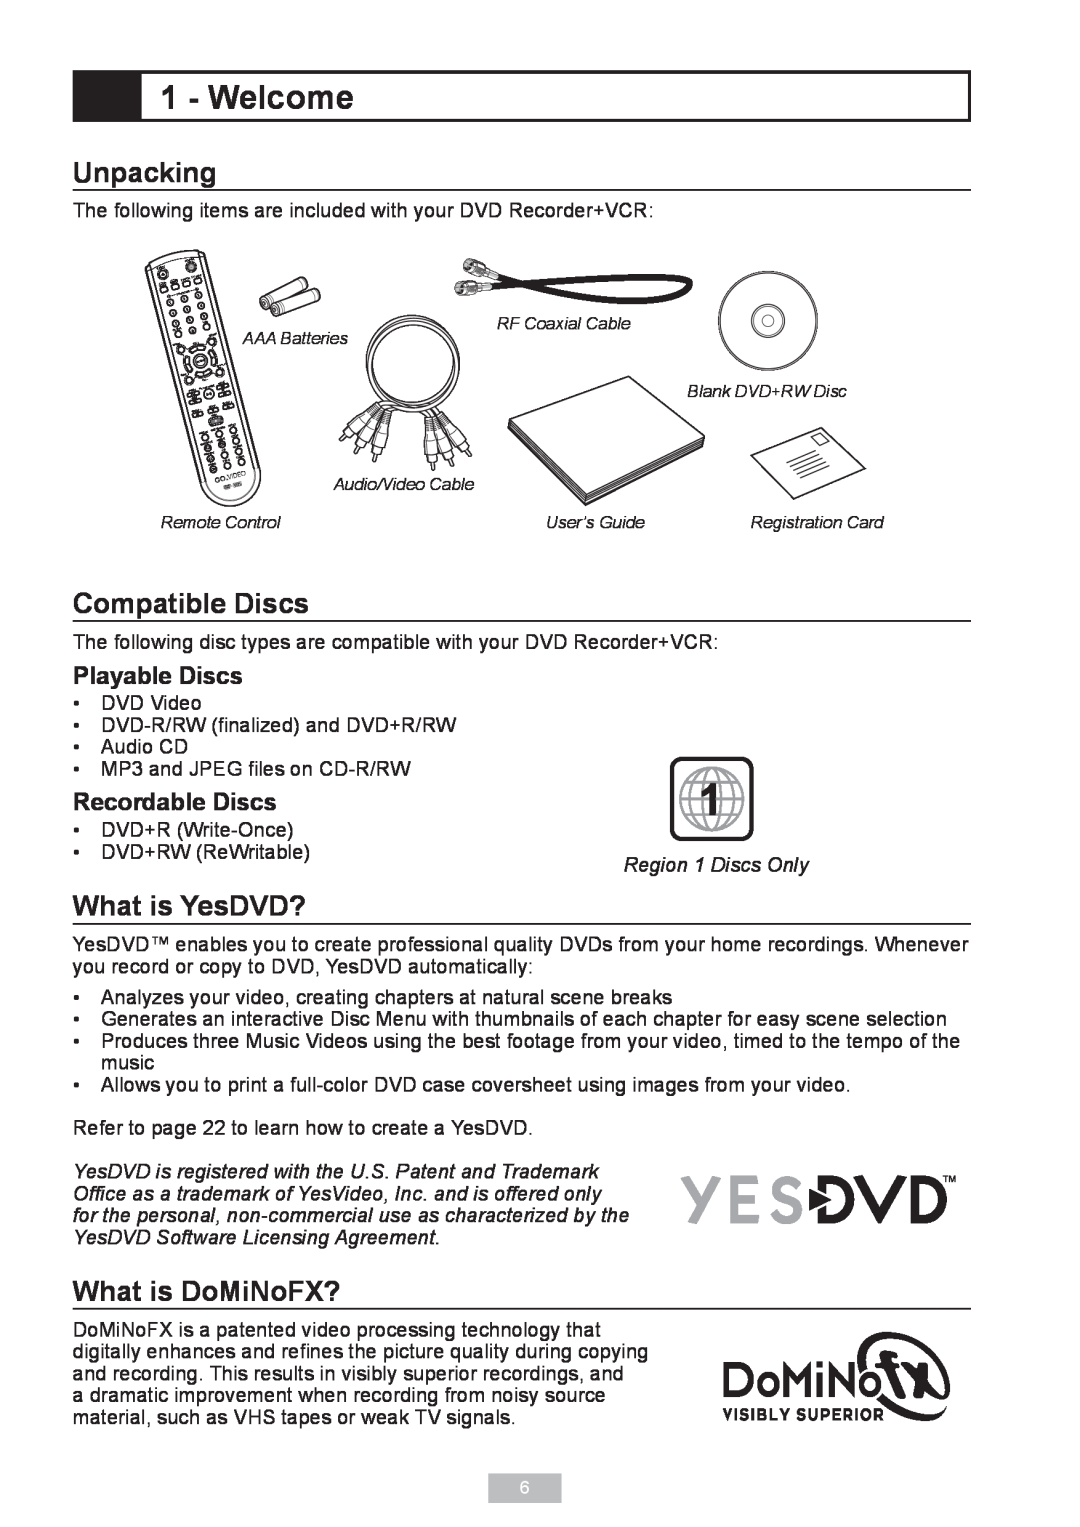 GoVideo VR2940 Welcome, Unpacking, Compatible Discs, What is YesDVD?, What is DoMiNoFX?, Playable Discs, Recordable Discs 